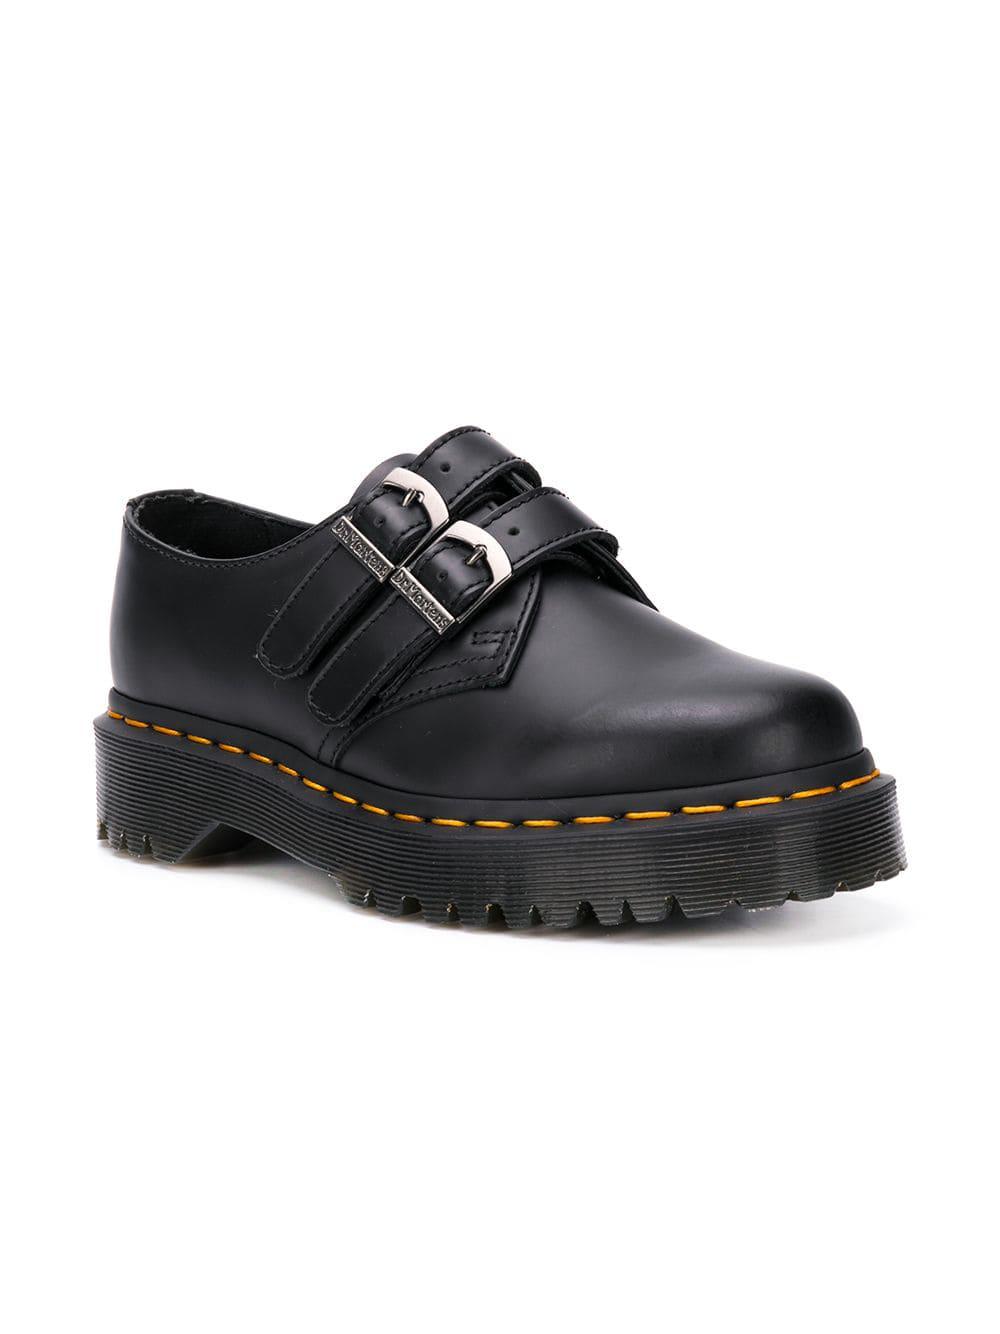 Dr. Martens Leather Double Buckle Shoes in Black | Lyst